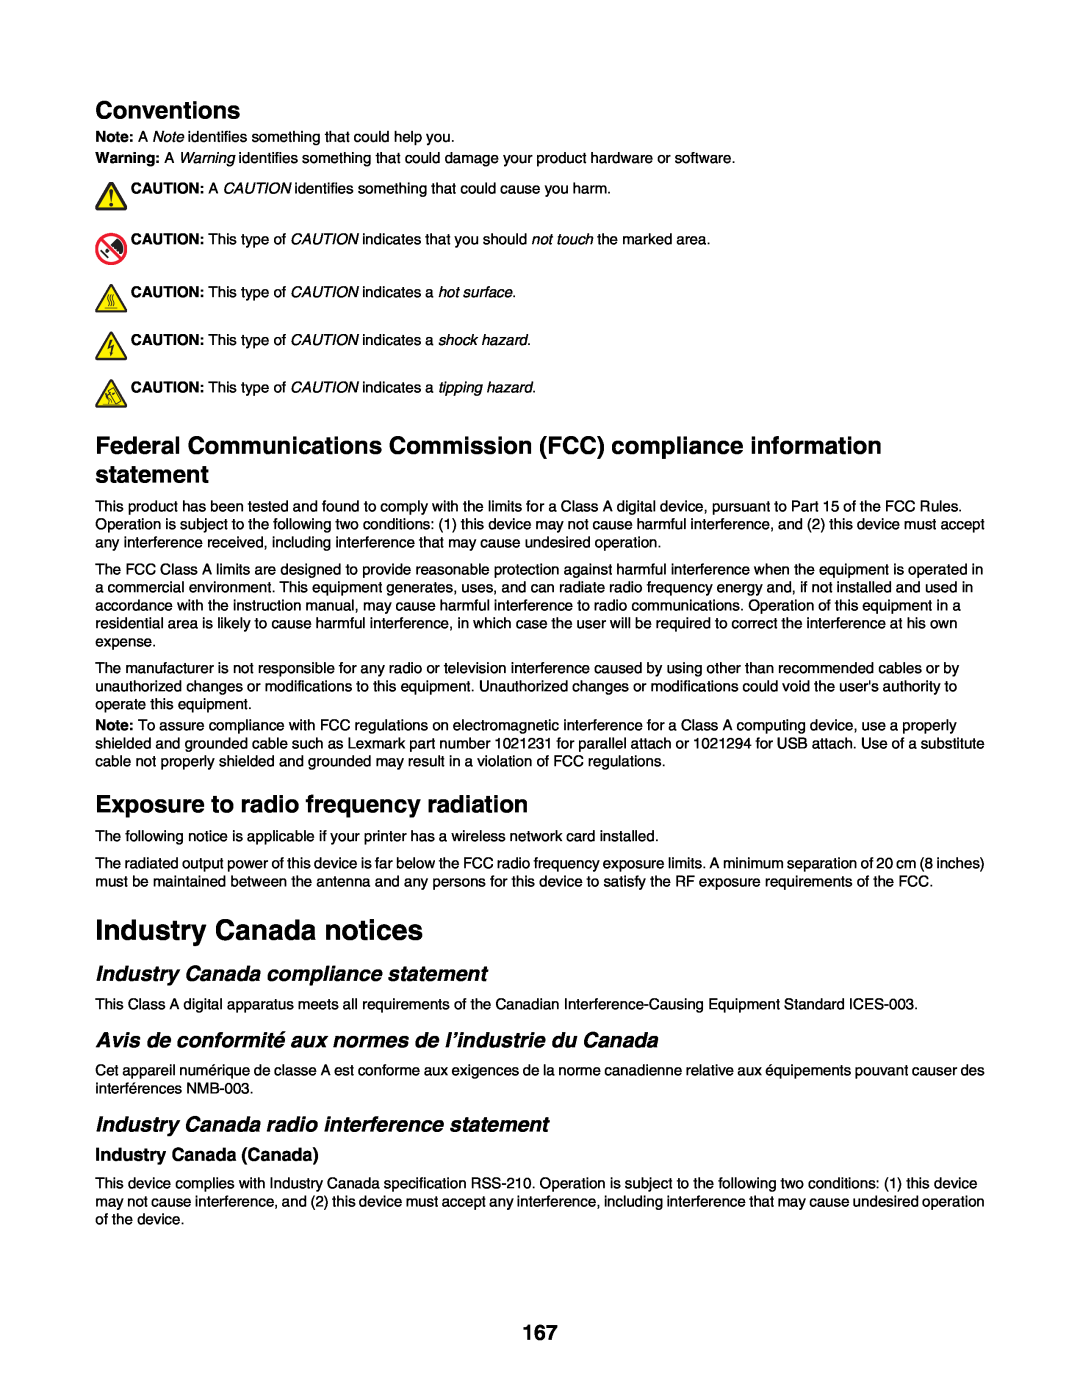 Lexmark C935 manual Industry Canada notices, Conventions, Exposure to radio frequency radiation, Industry Canada Canada 